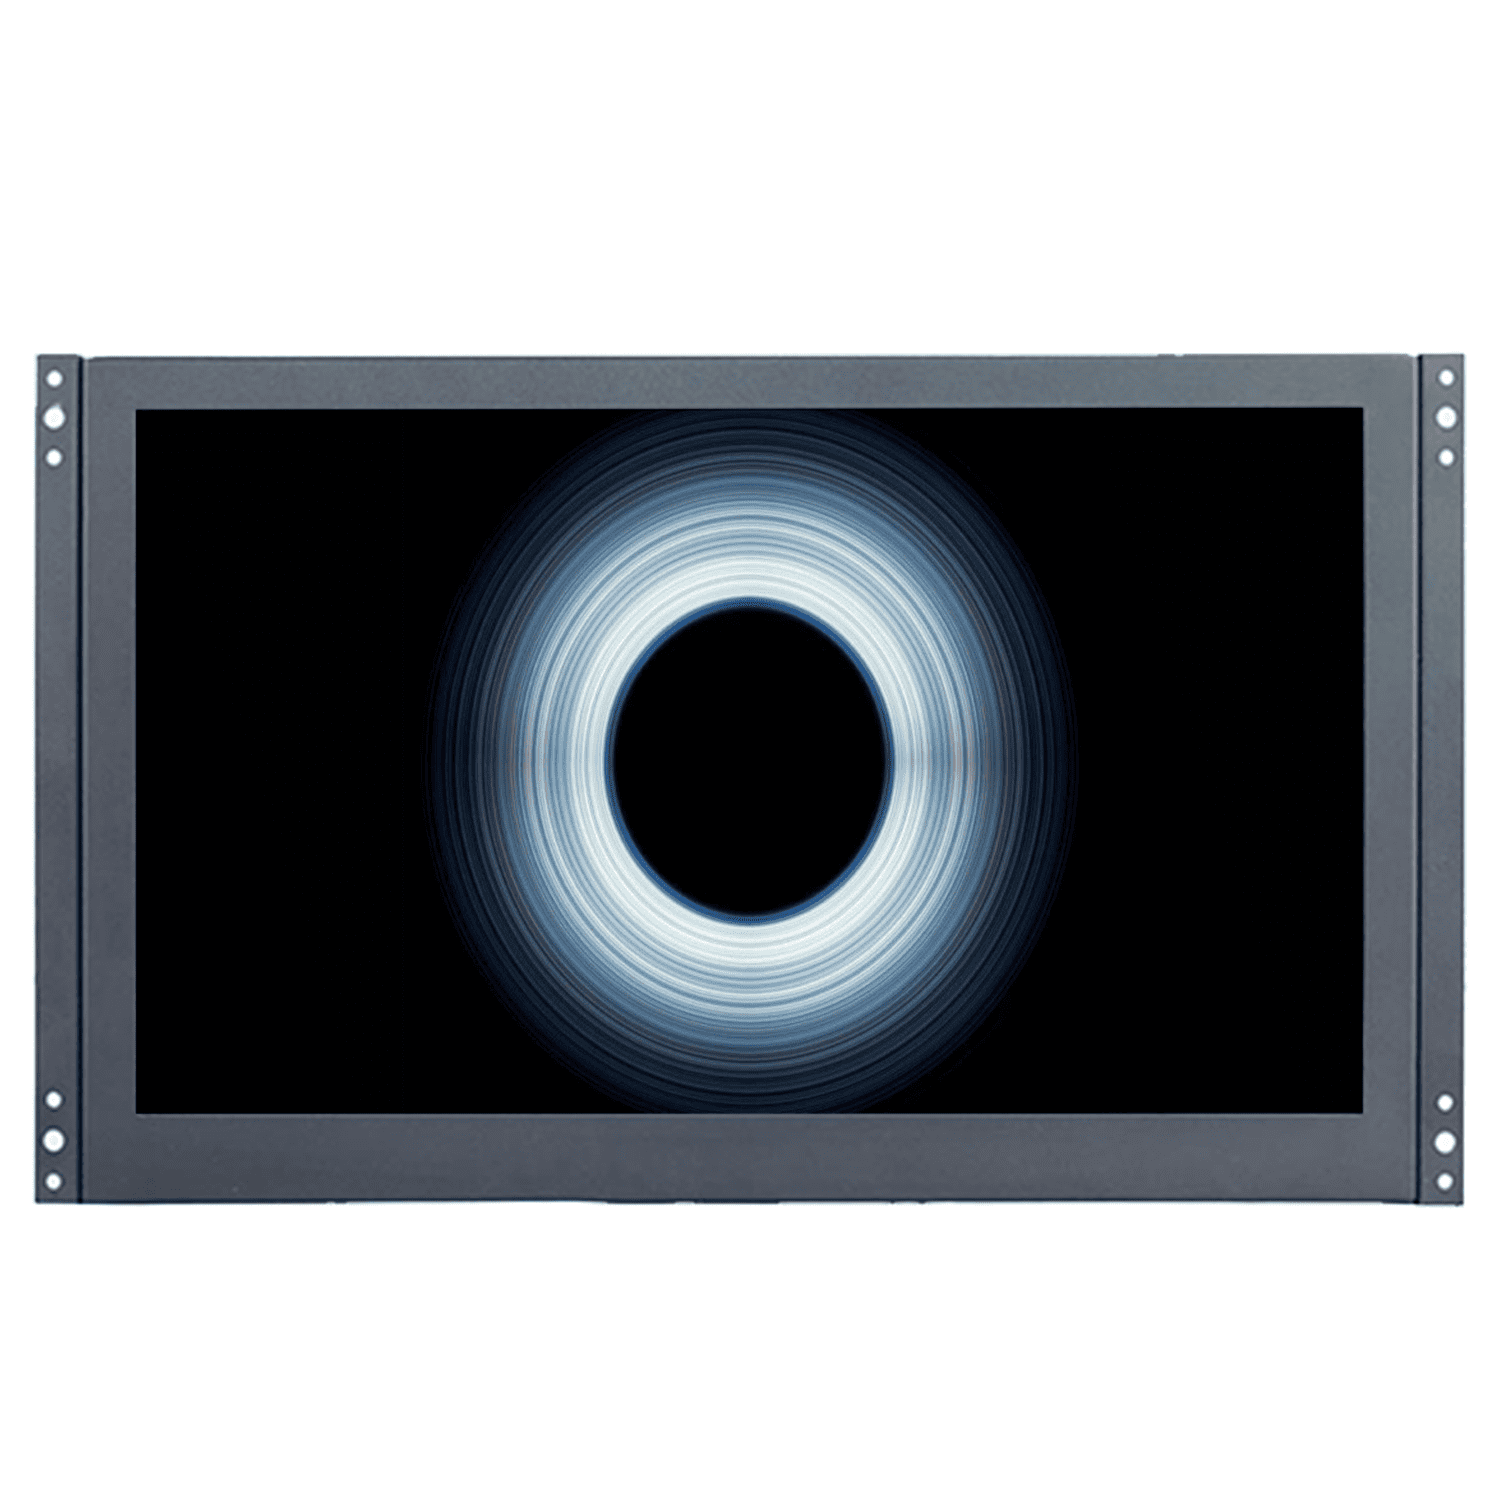 13.3 inch high-definition industrial touch open VGAHDMI LCD monitor